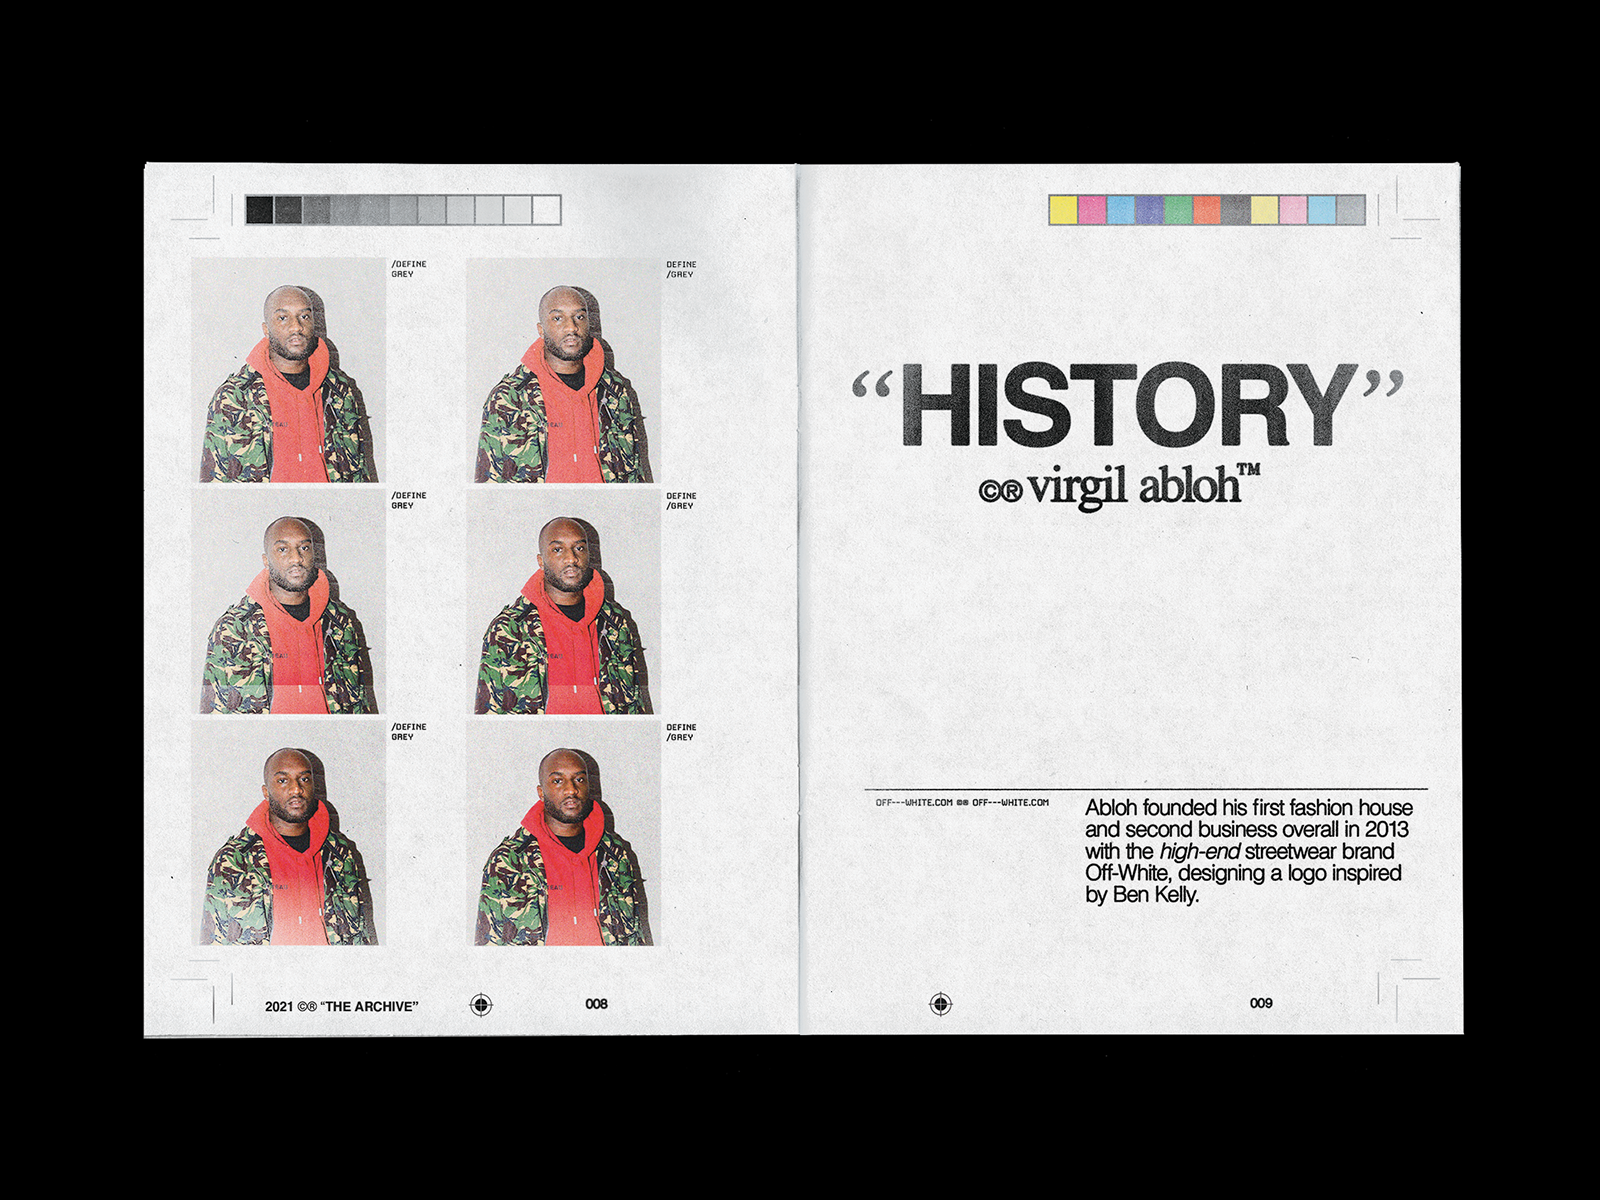 Off-White c/o Virgil Abloh™ — The Archive by Andrés Santana on Dribbble